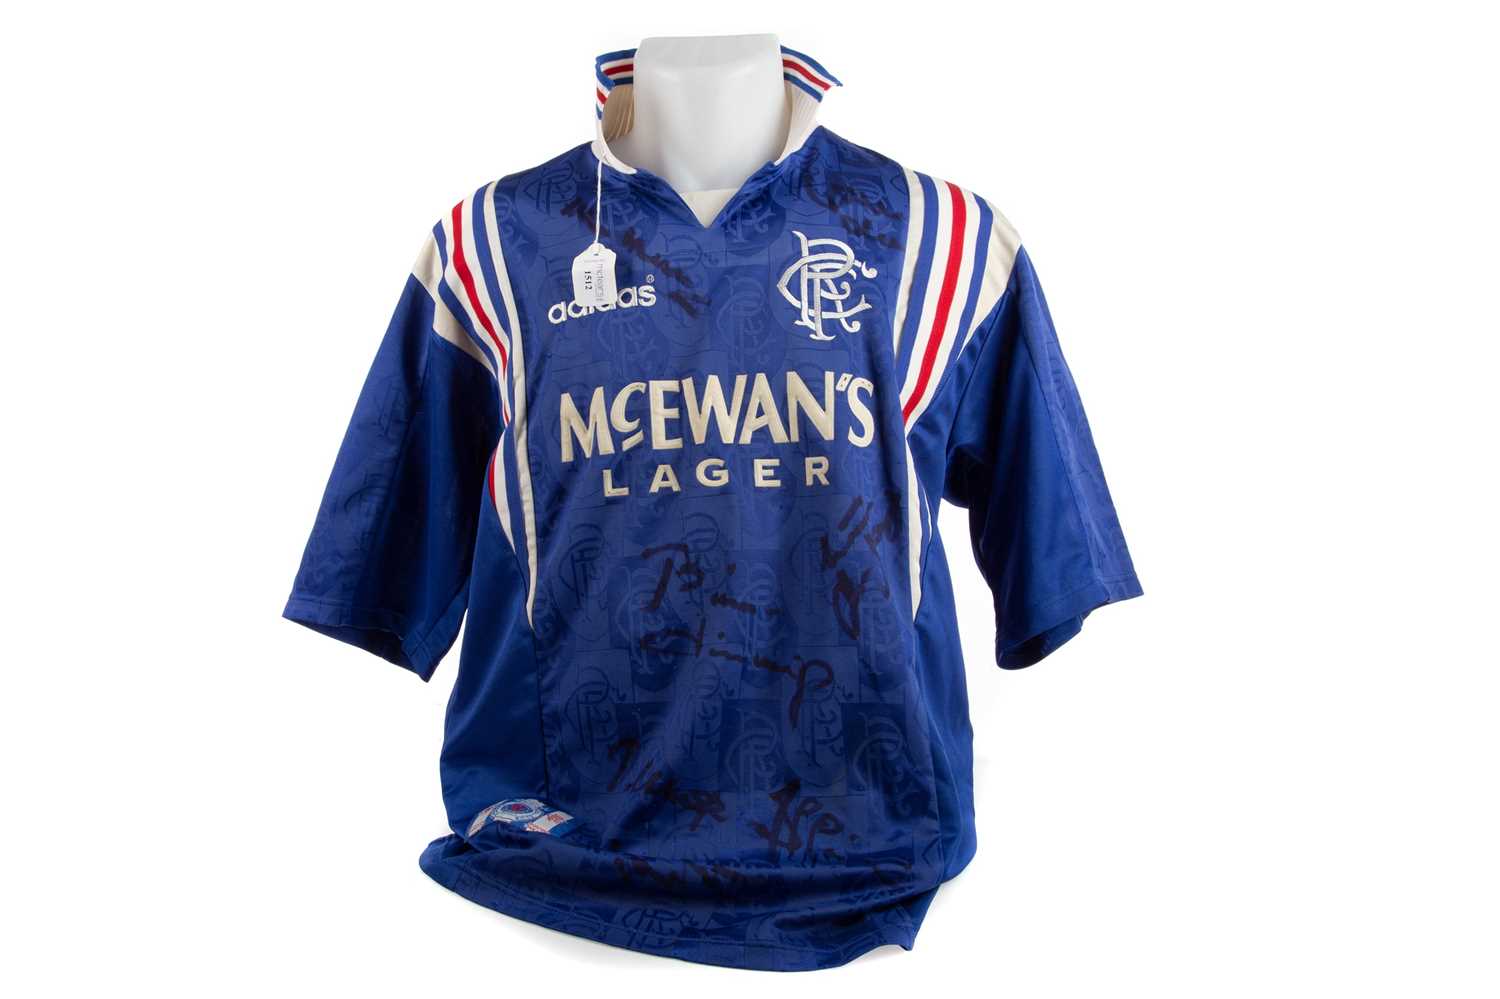 A RANGERS F.C. SIGNED JERSEY